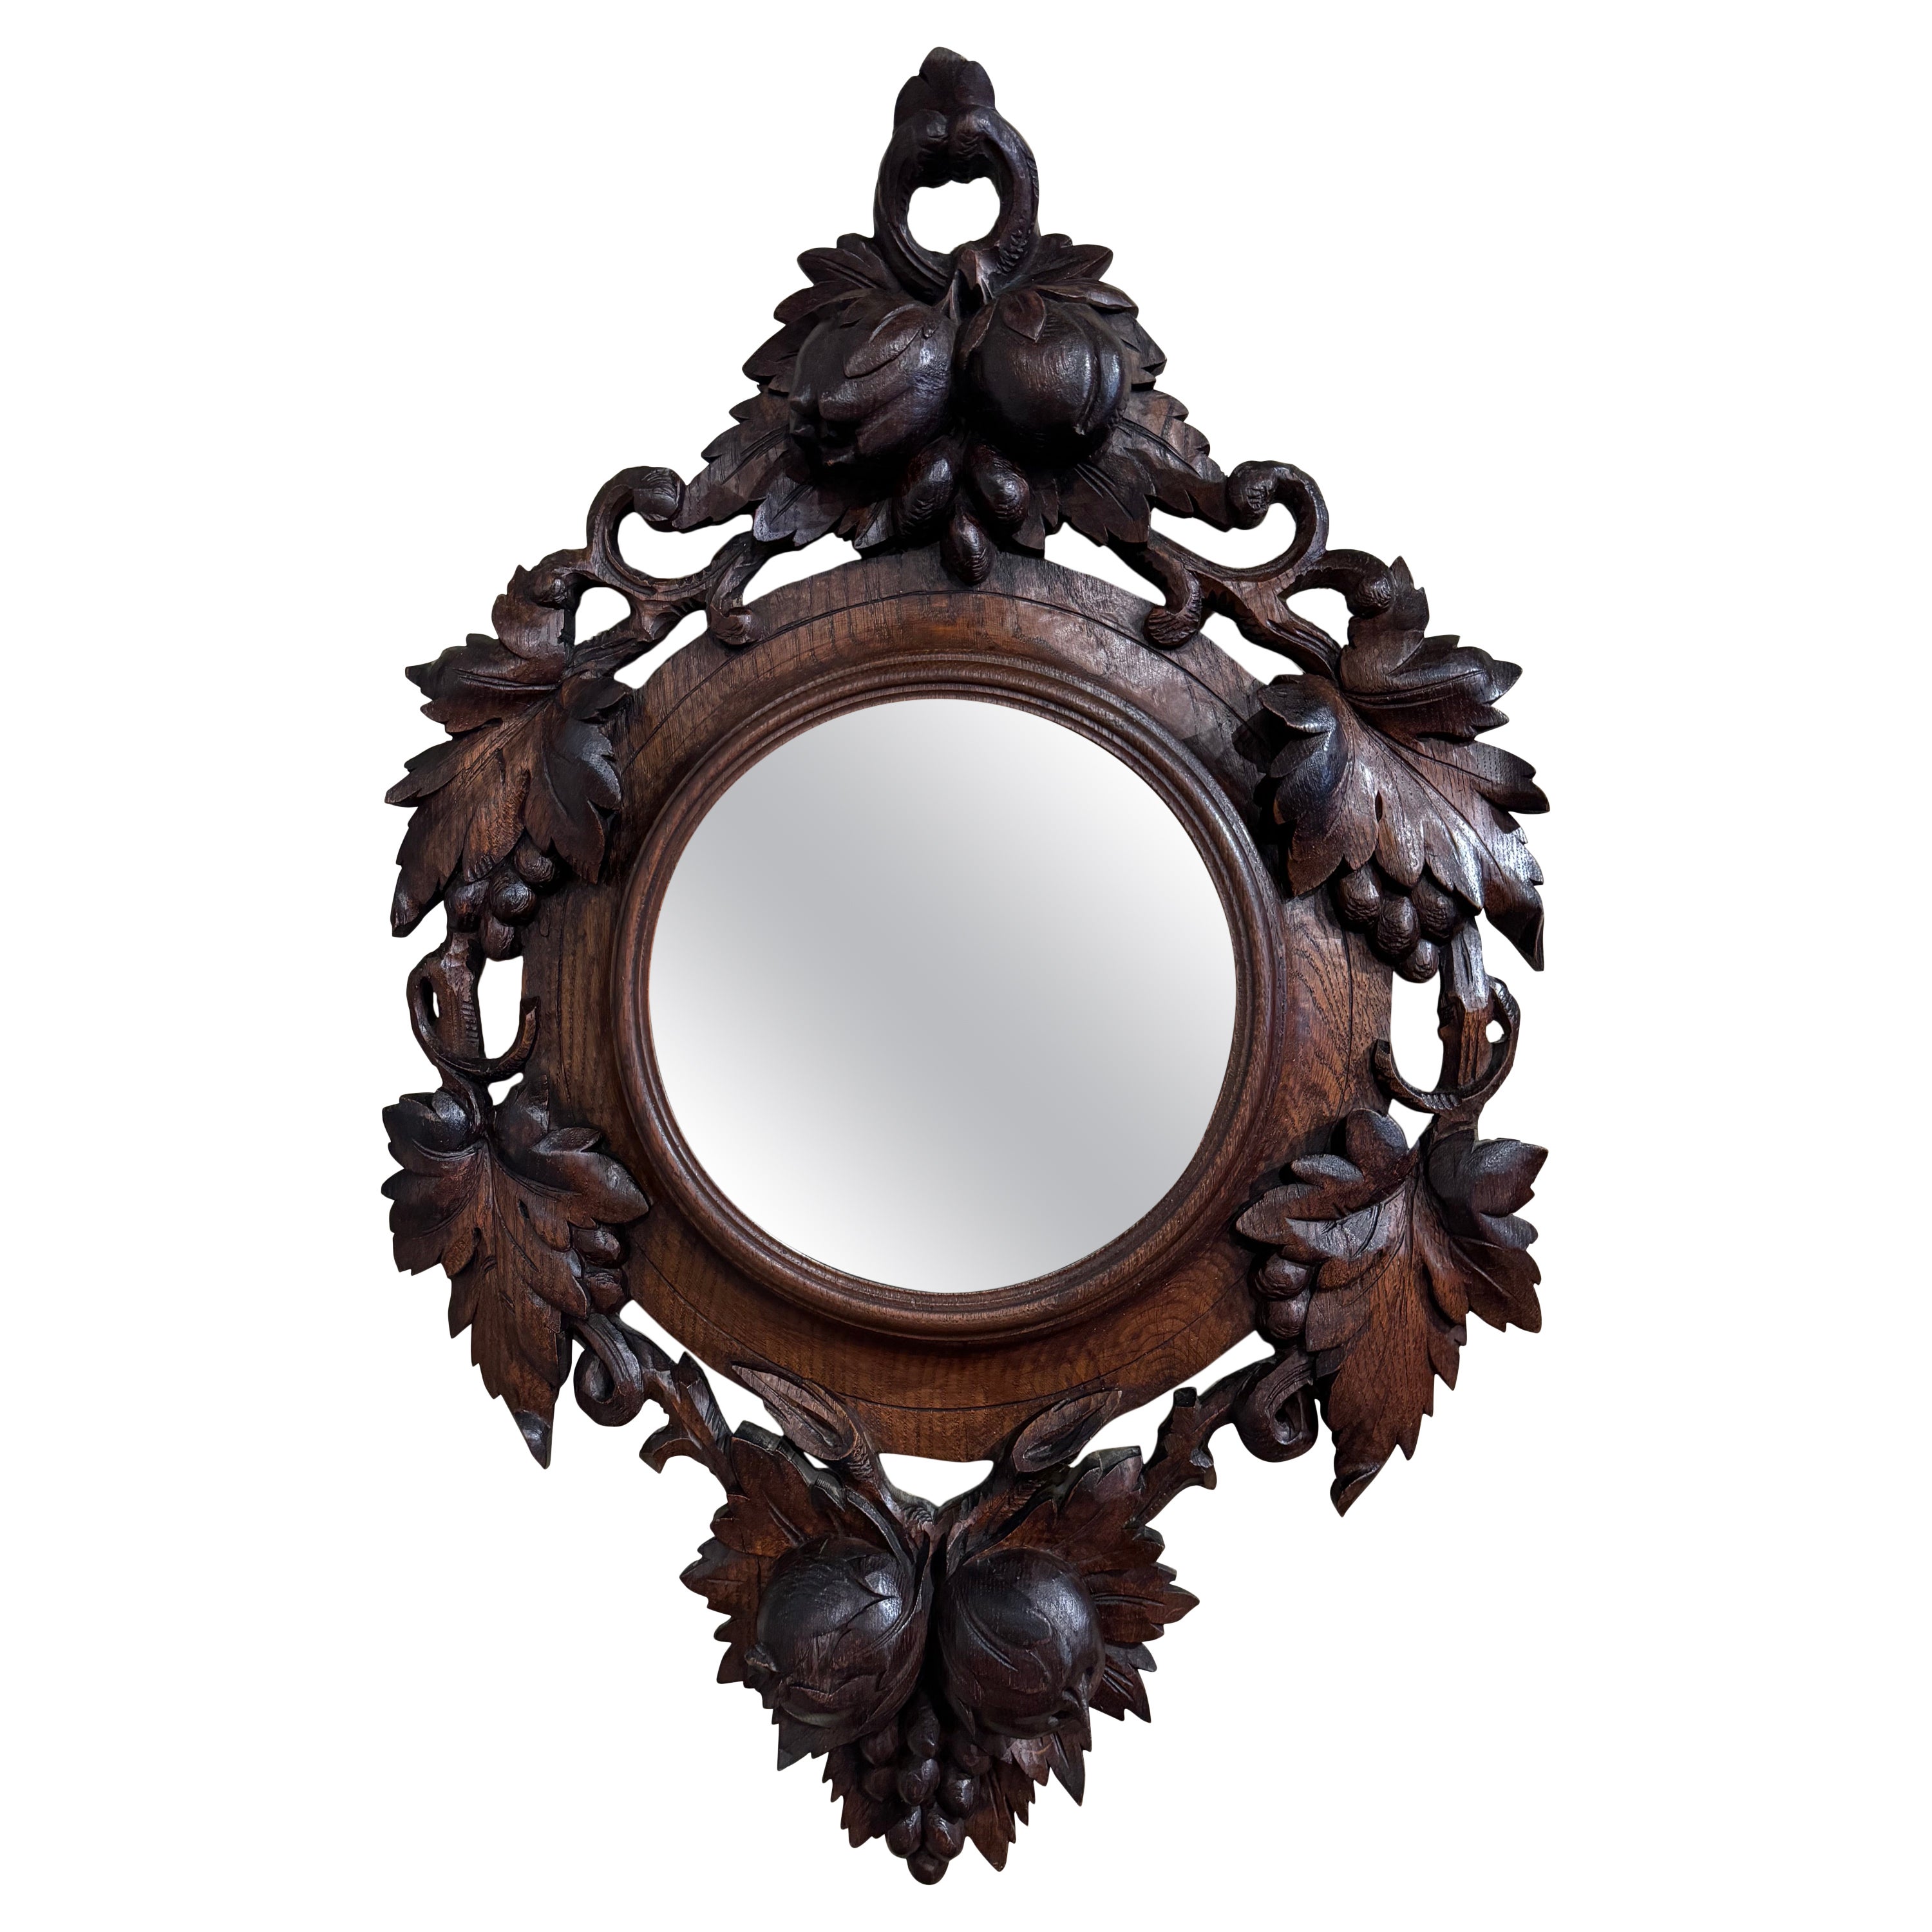 19th Century French Black Forest Carved Oak Wall Mirror with Fruit Motifs